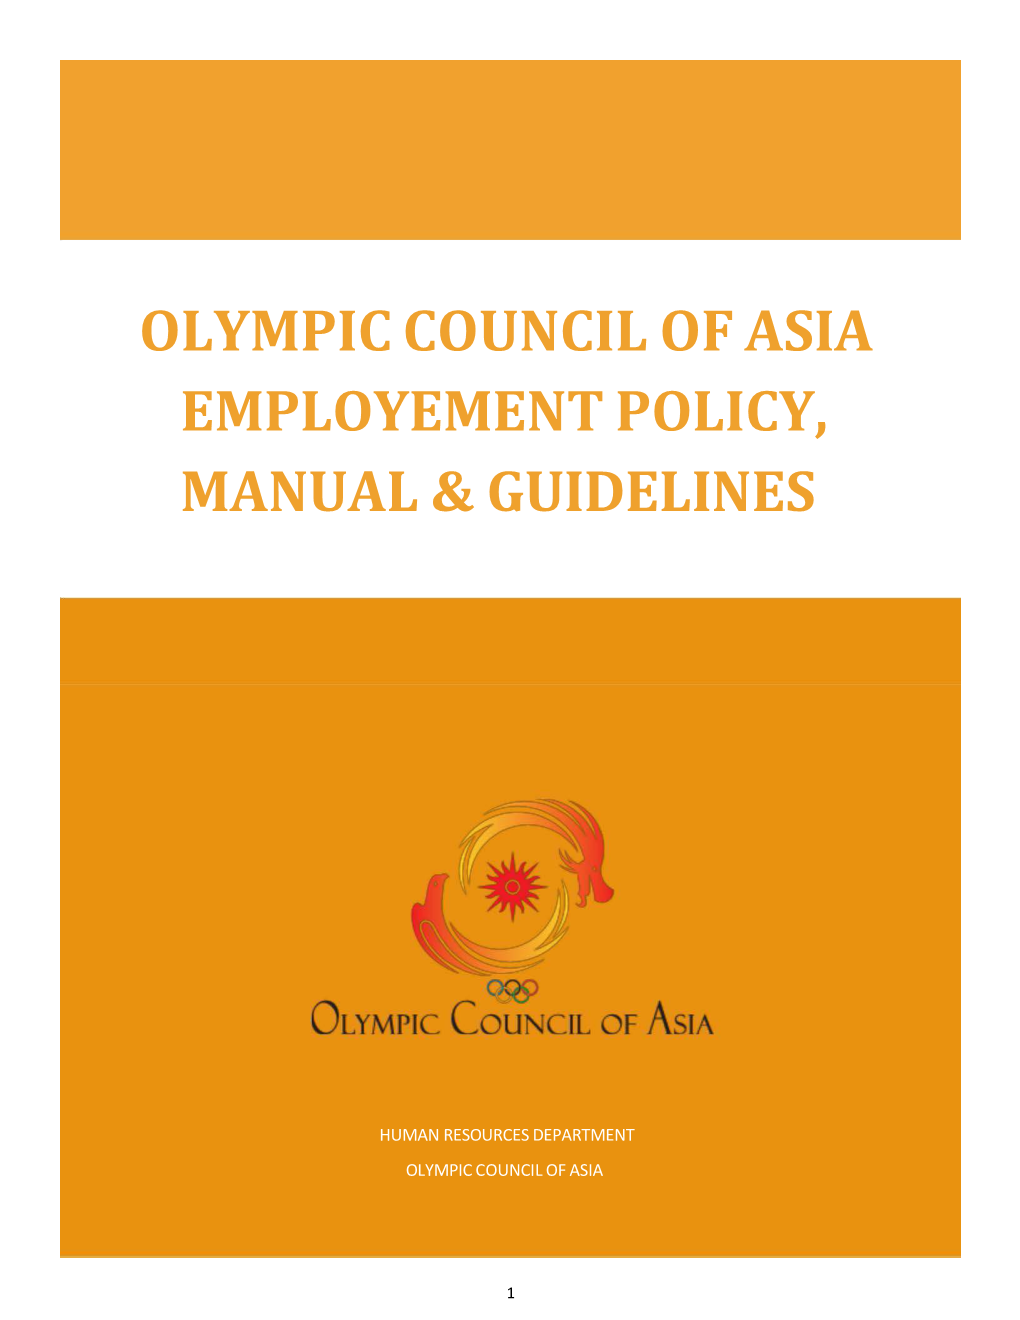 Olympic Council of Asia Employement Policy, Manual & Guidelines